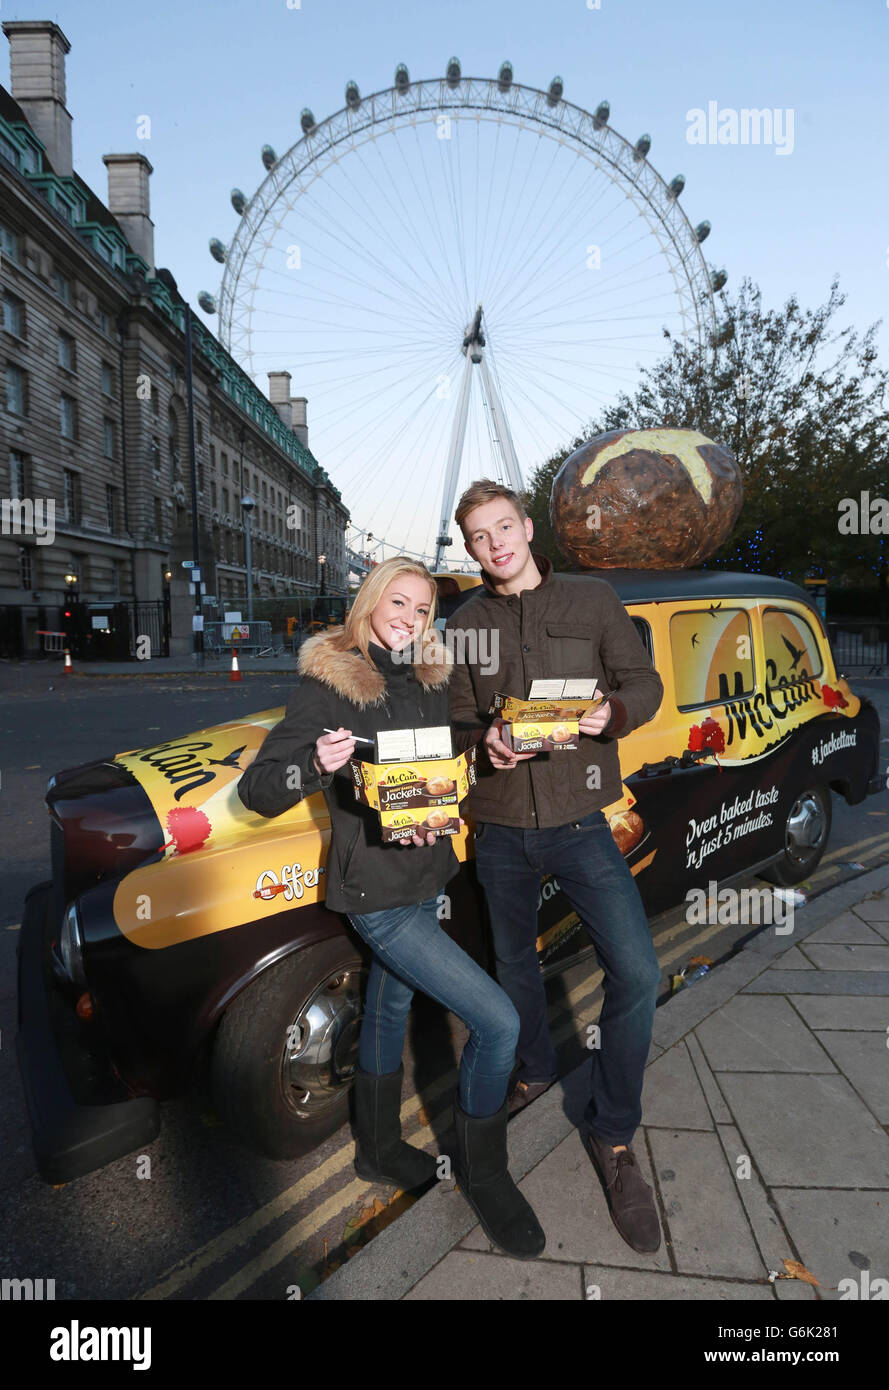 Roisin Acraman from Hertford and Hector Grenville from Finsbury Park, London, eat a McCain Ready Baked Jacket potato cooked in the Jacket Taxi, a specially modified taxi with built in potato cooking facilities, parked in front of the London Eye in London. Stock Photo